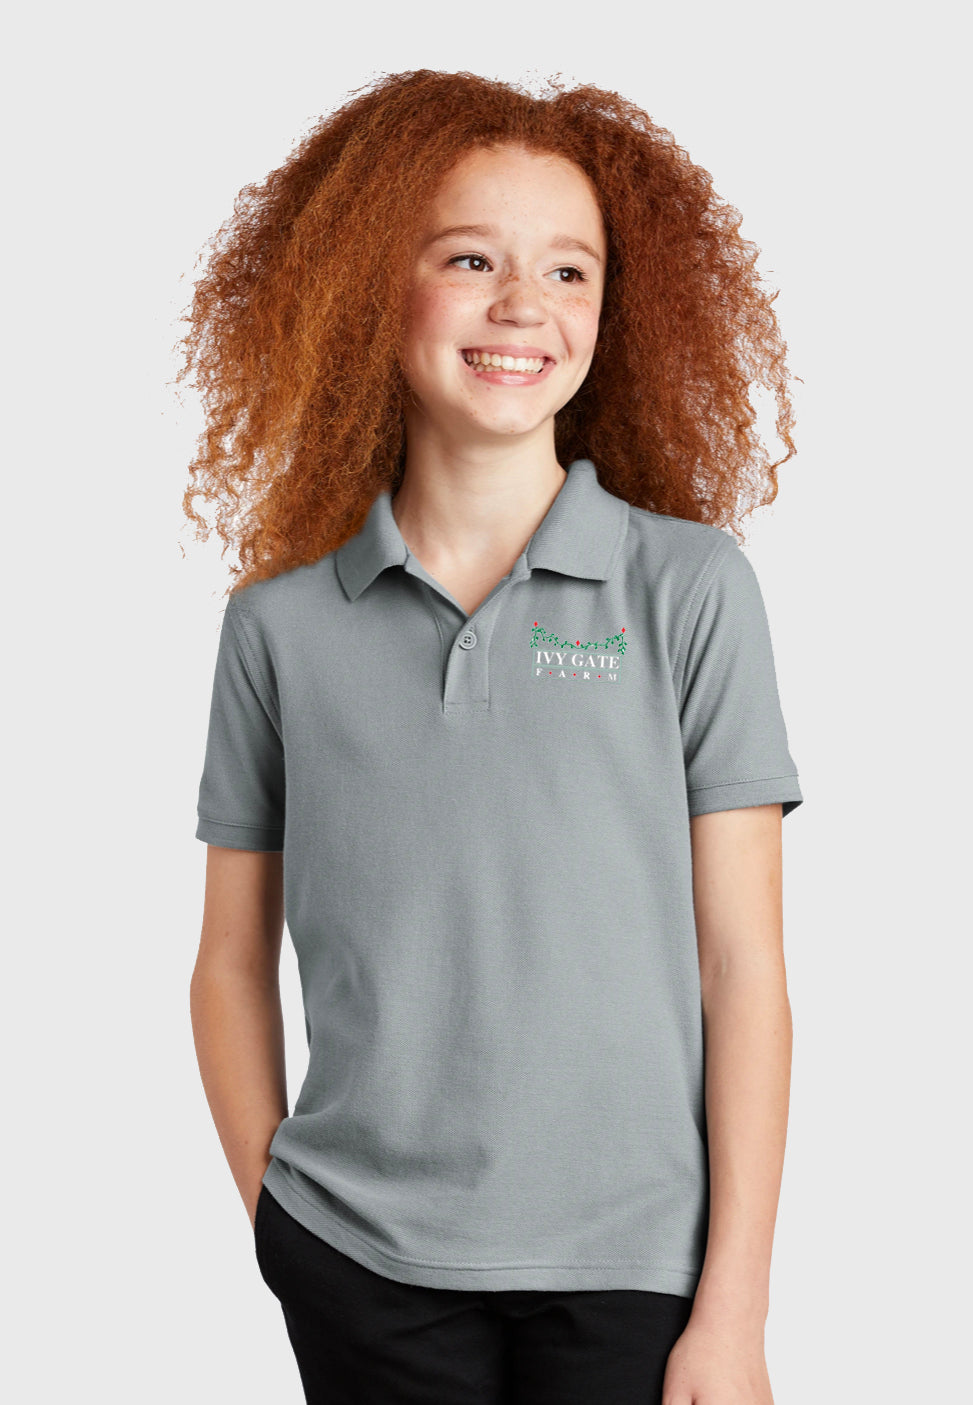 Ivy Gate Farm Port Authority® Youth Classic Pique Polo